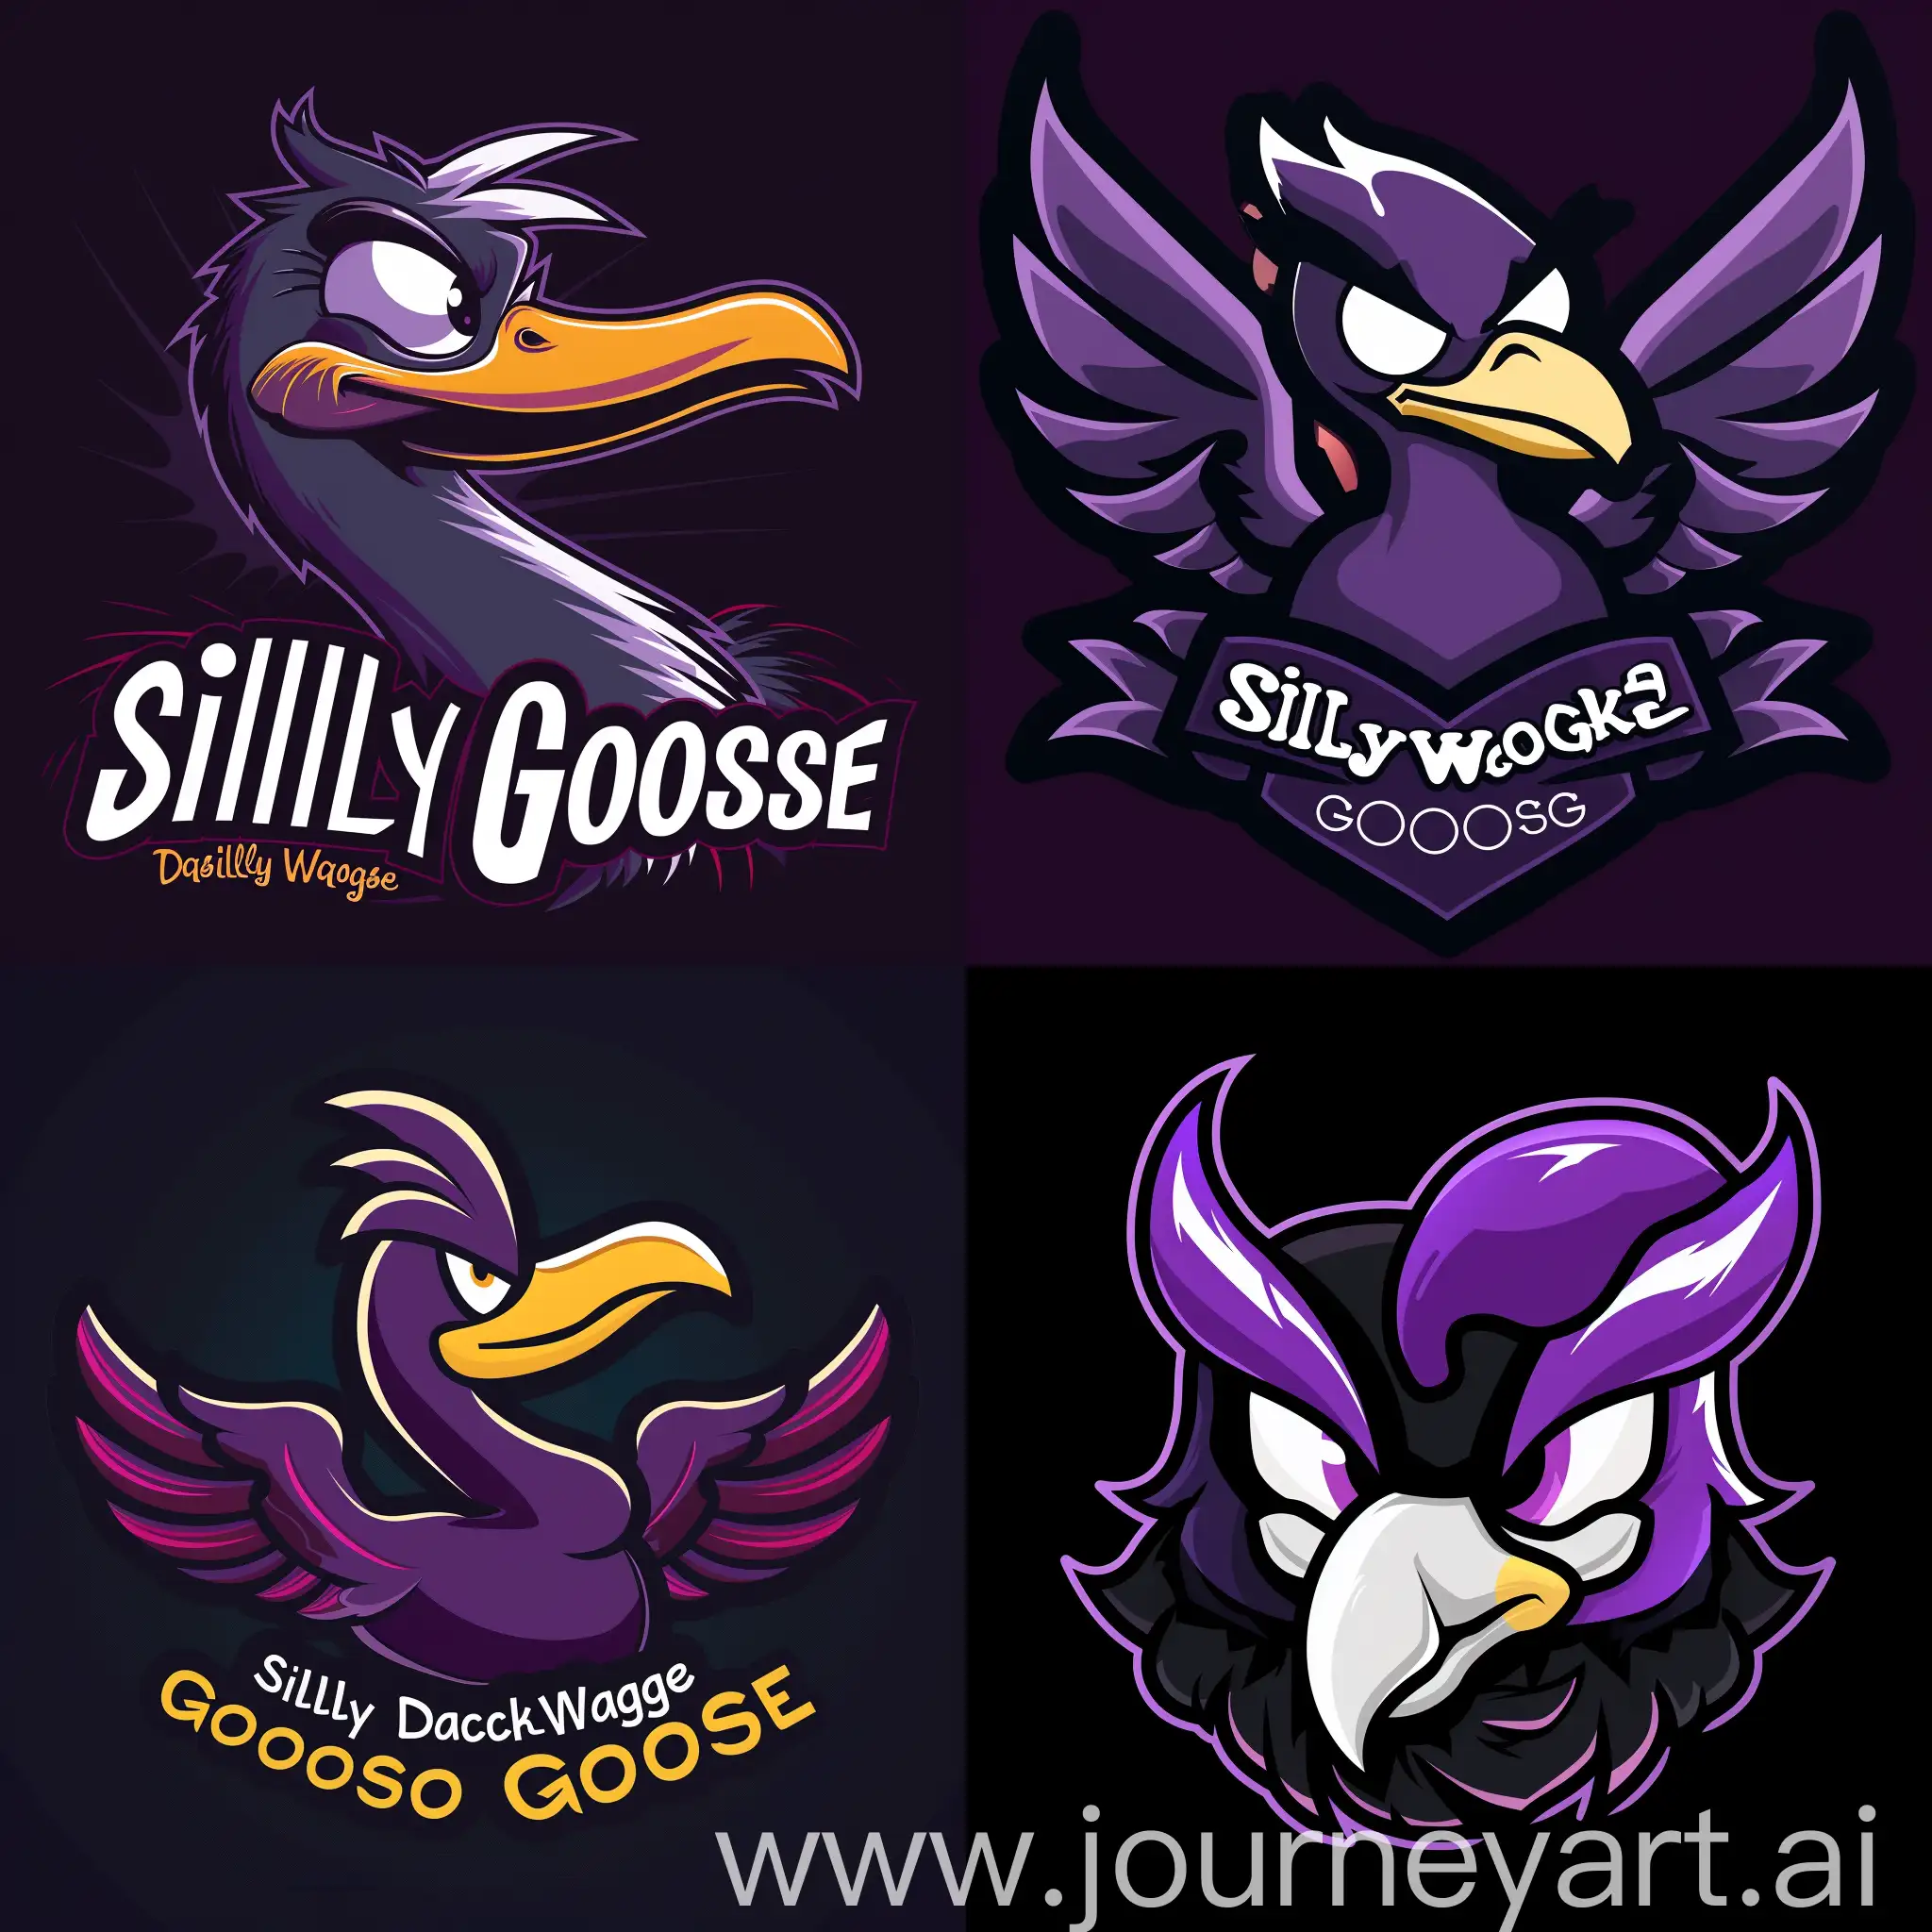 logo for "silly darkwing gooose" gaming company